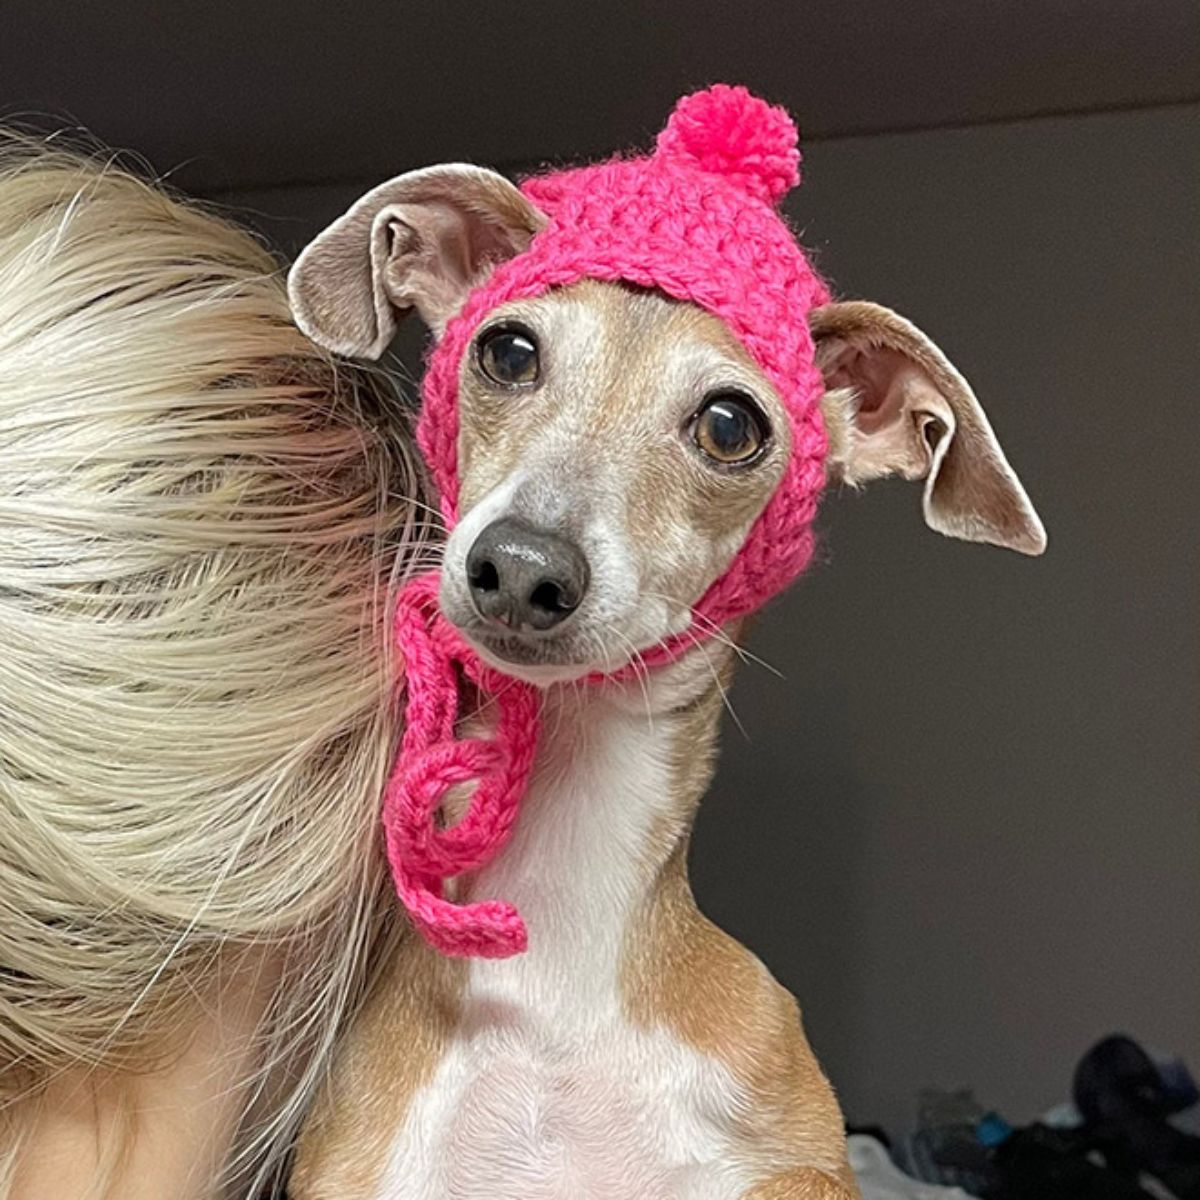 brown and white greyhound wearing a bright pink crocheted hat with a pom pom on top being held by someone